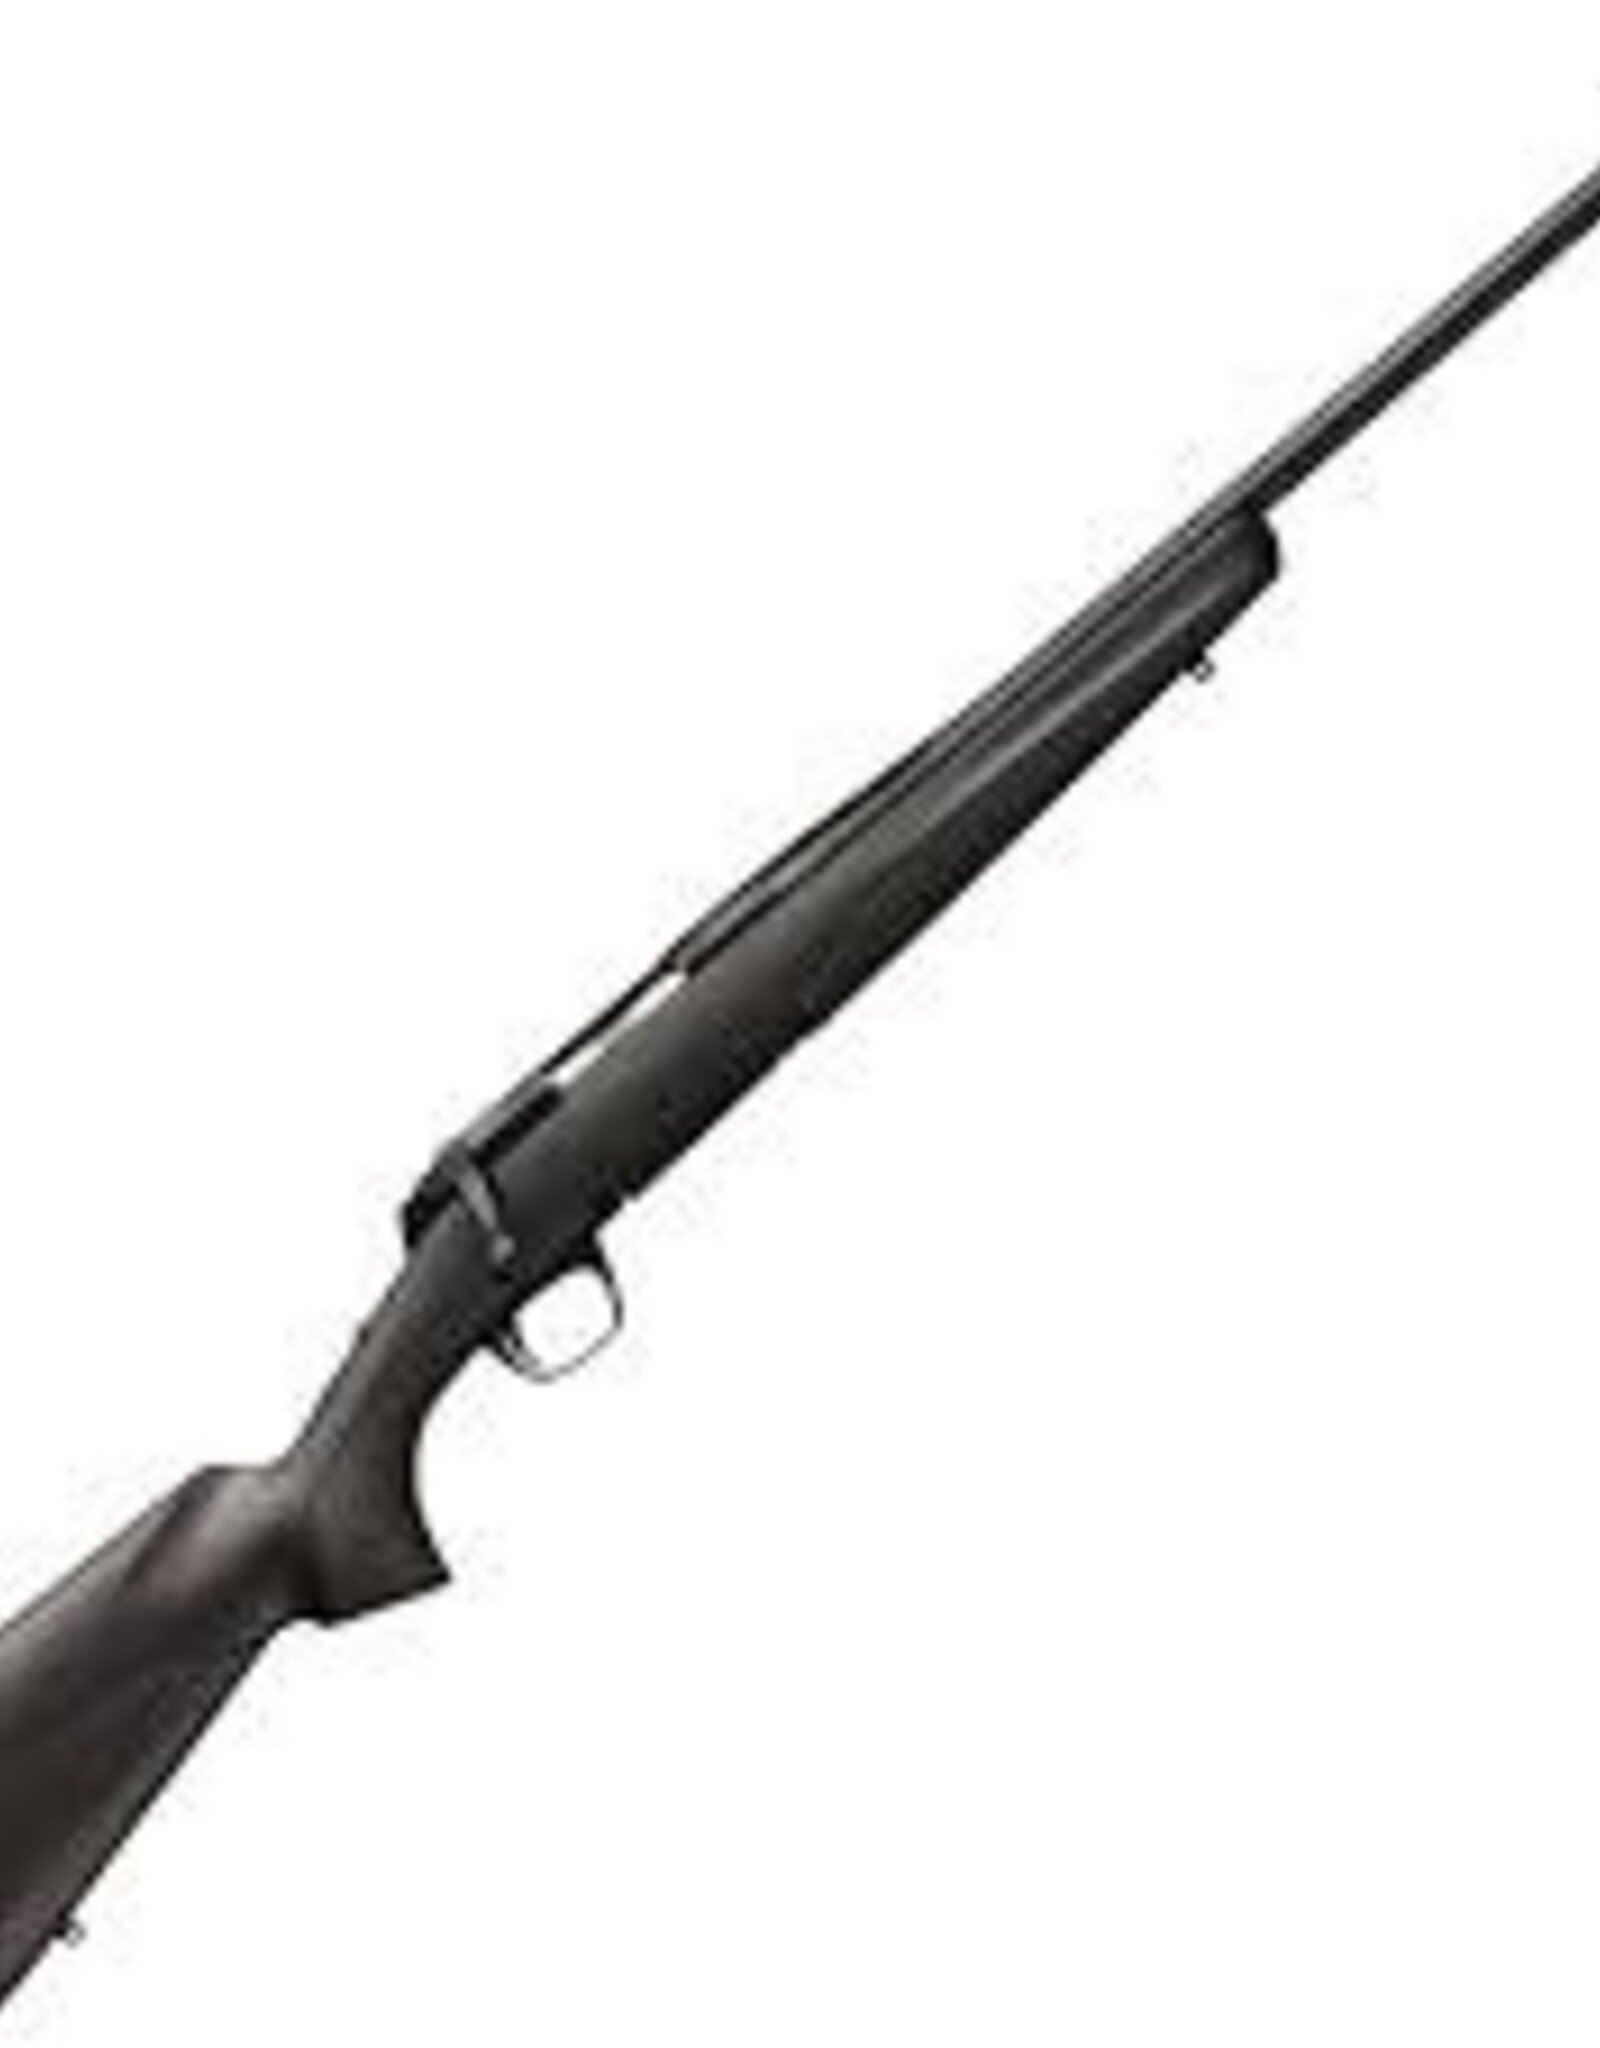 Browning X-Bolt Micro Composite